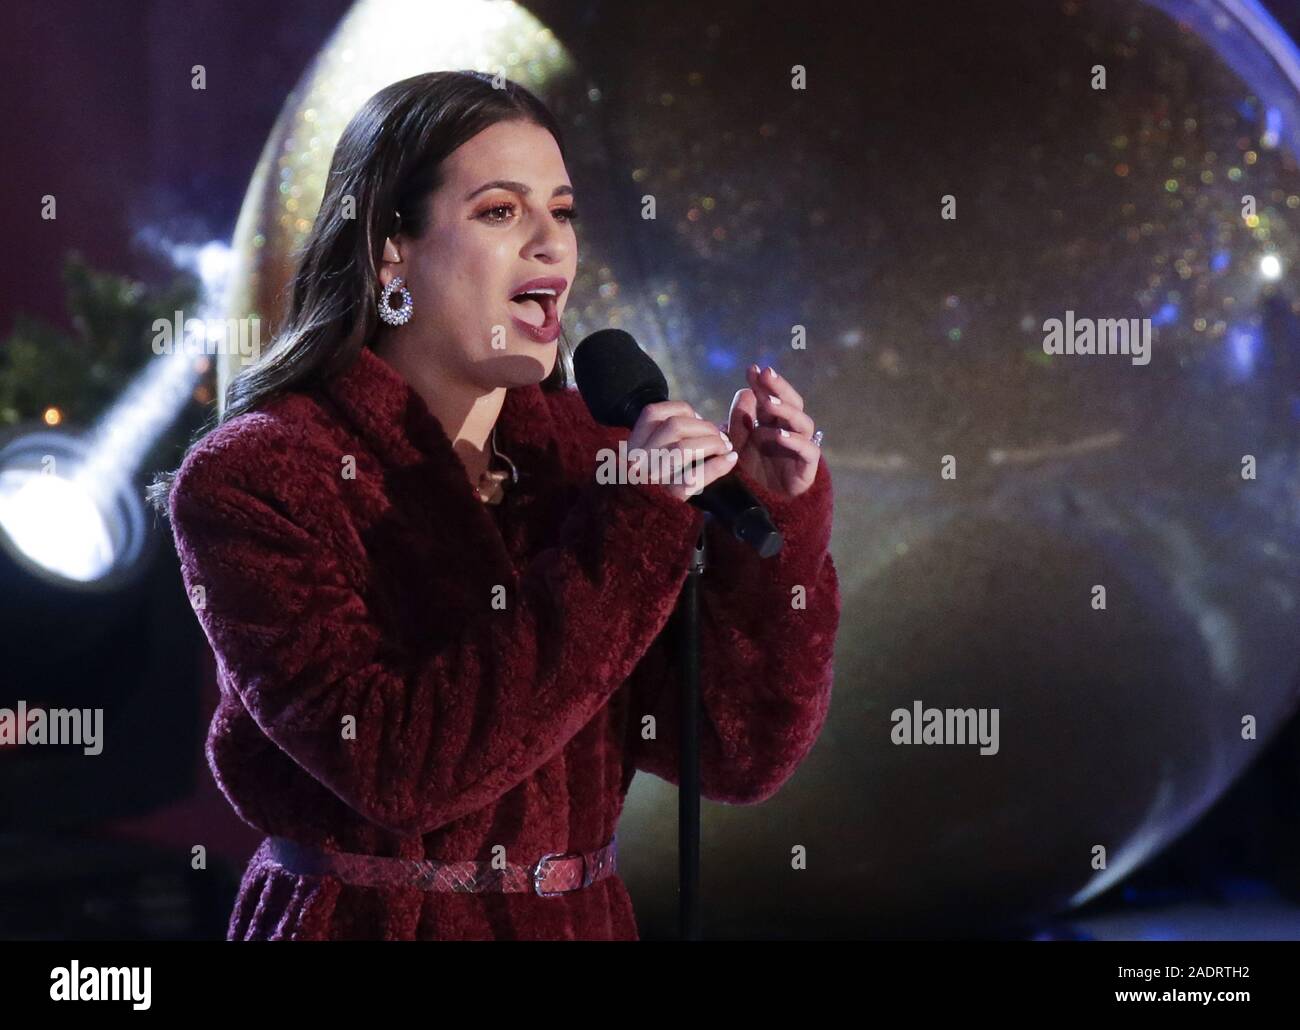 New York, United States. 4th Dec, 2019. Lea Michele performS at the 87th annual Christmas Tree Lighting Ceremony at Rockefeller Center in New York City on Wednesday, December 4, 2019. Photo by John Angelillo/UPI Credit: UPI/Alamy Live News Stock Photo